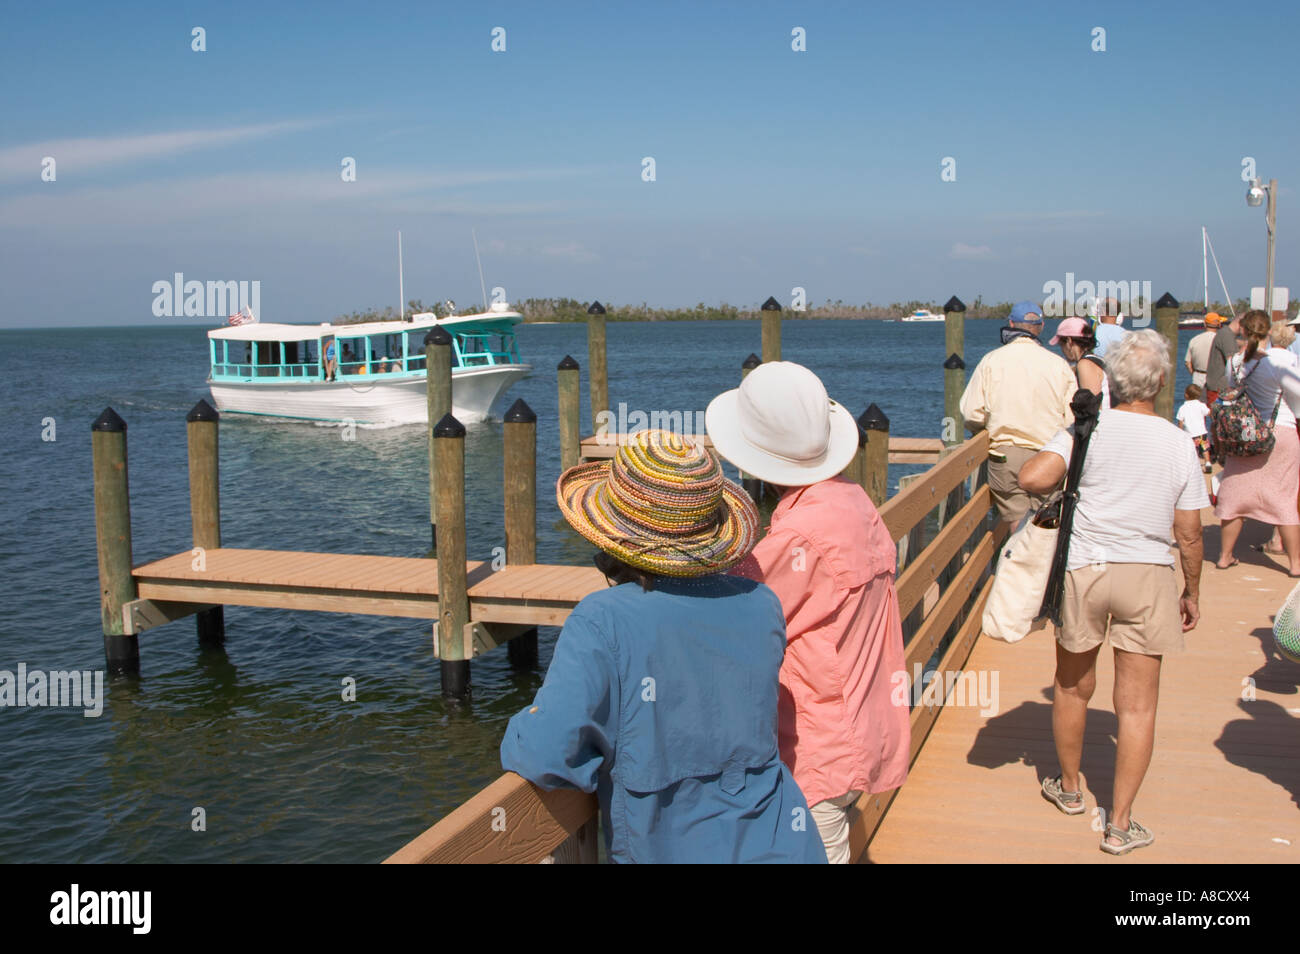 TROPIC STAR TOUR BOAT COMING INTO DOCK AT CAYO COSTA STATE PARK ON THE GULF OF MEXICO IN SOUTHWEST FLORIDA Stock Photo